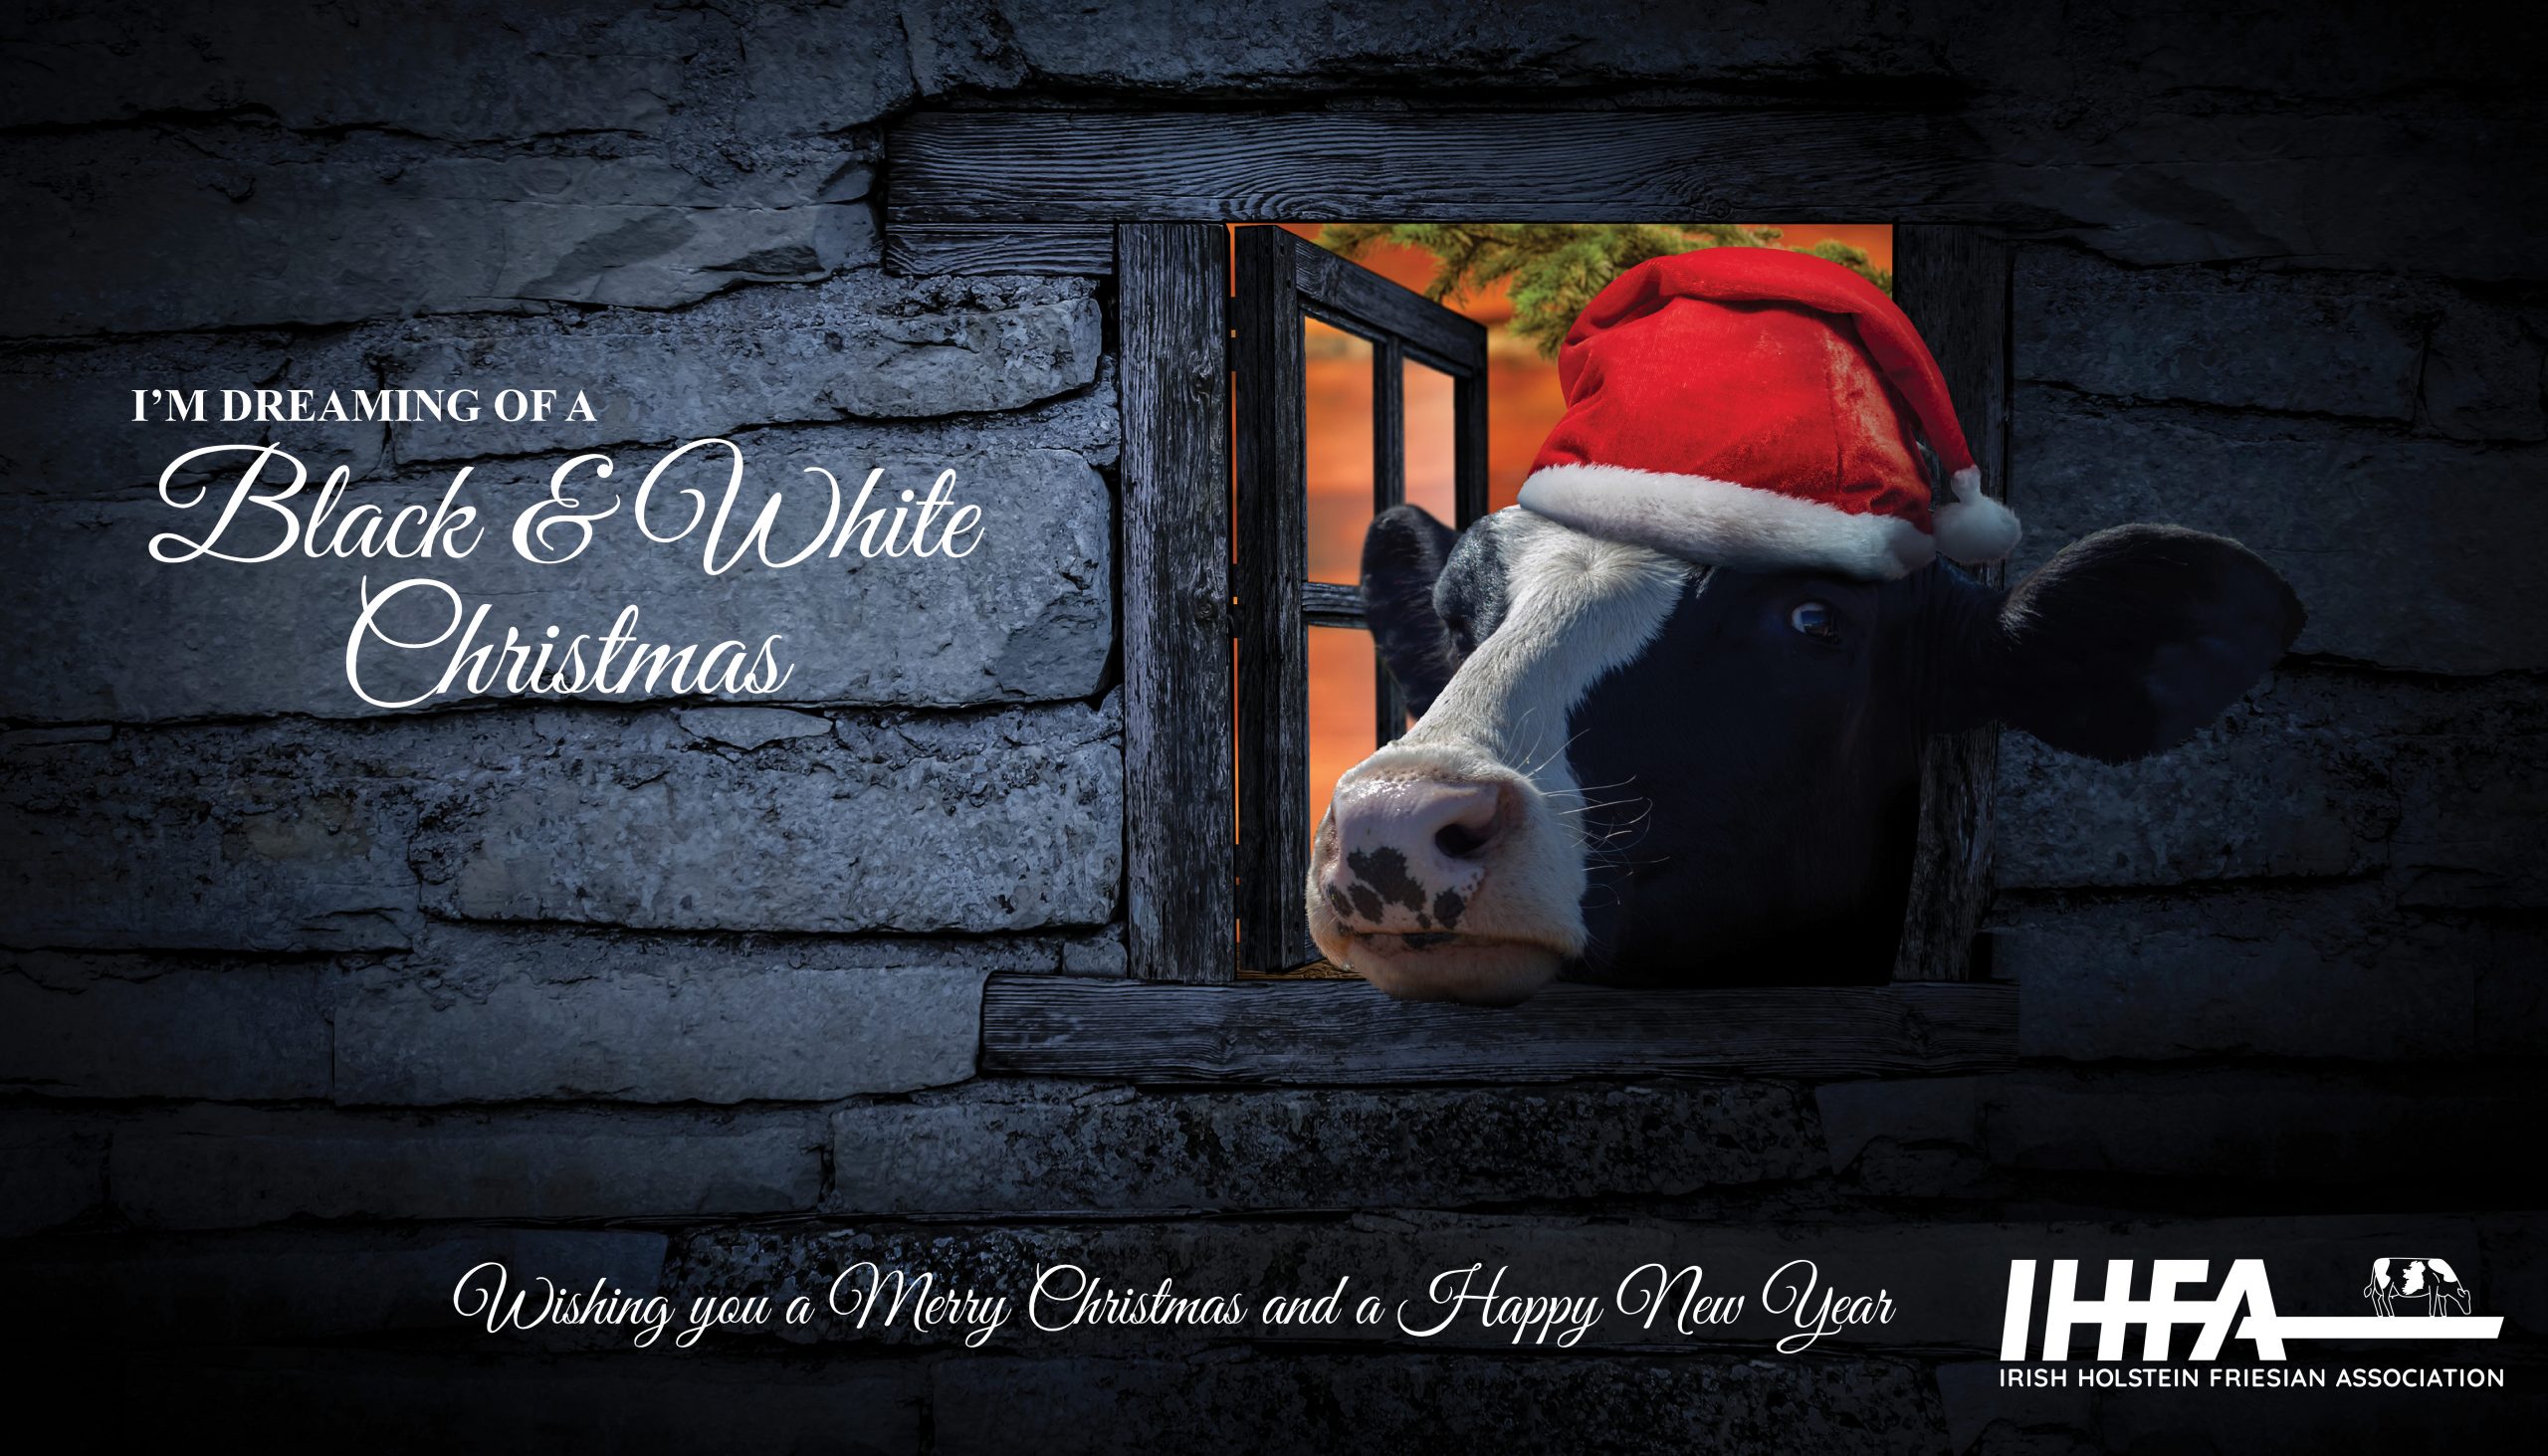 Merry Christmas from IHFA